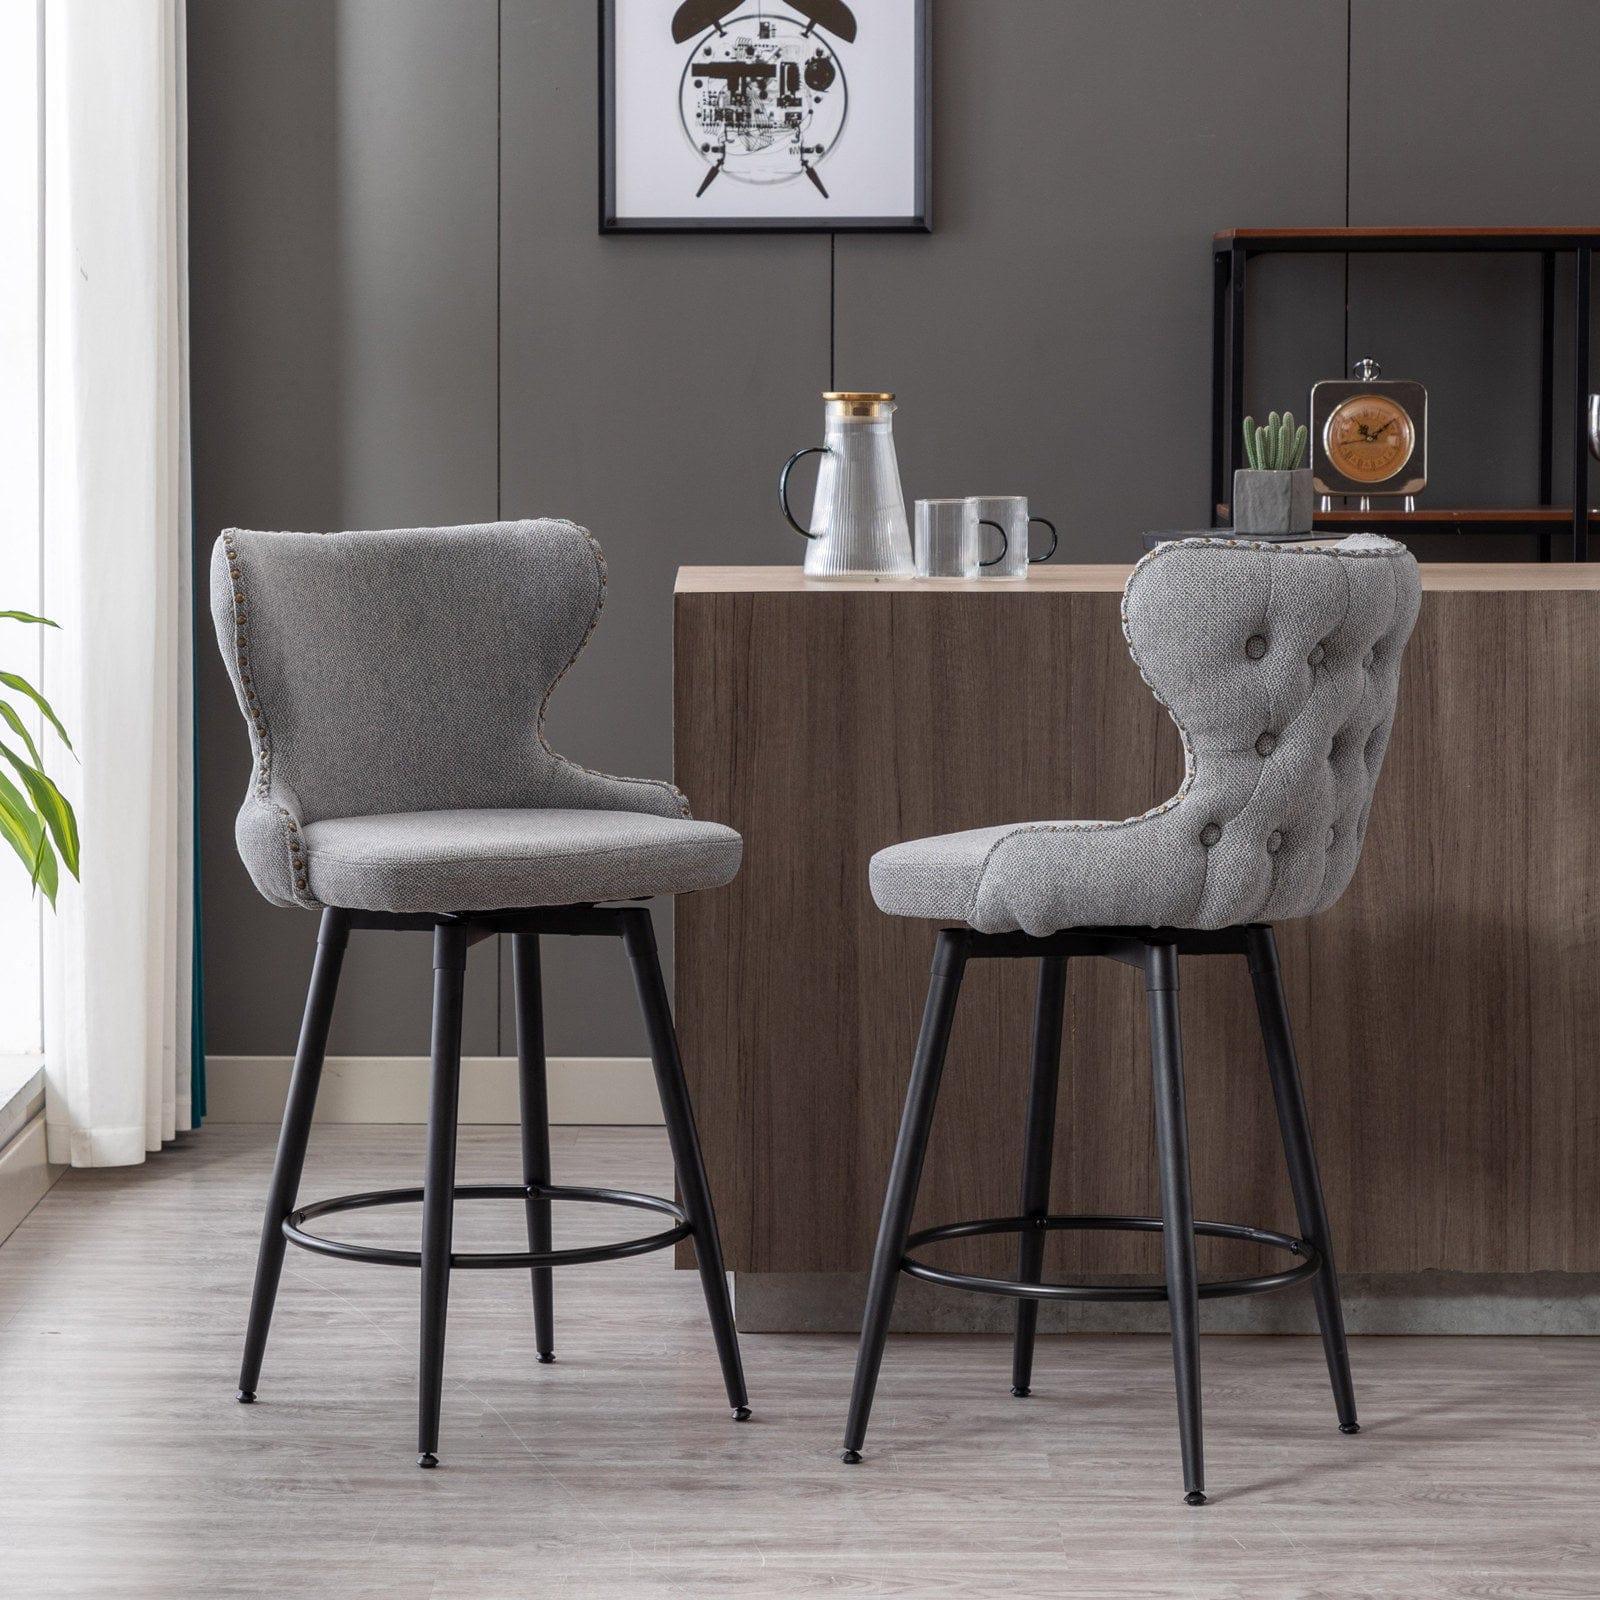 Shop A&A Furniture,Counter Height 25" Modern Linen Fabric Counter Chairs,180° Swivel Bar Stool Chair for Kitchen,Tufted Cupreous Nailhead Trim Burlap Bar Stools with Metal Legs,Set of 2 (Gray) Mademoiselle Home Decor